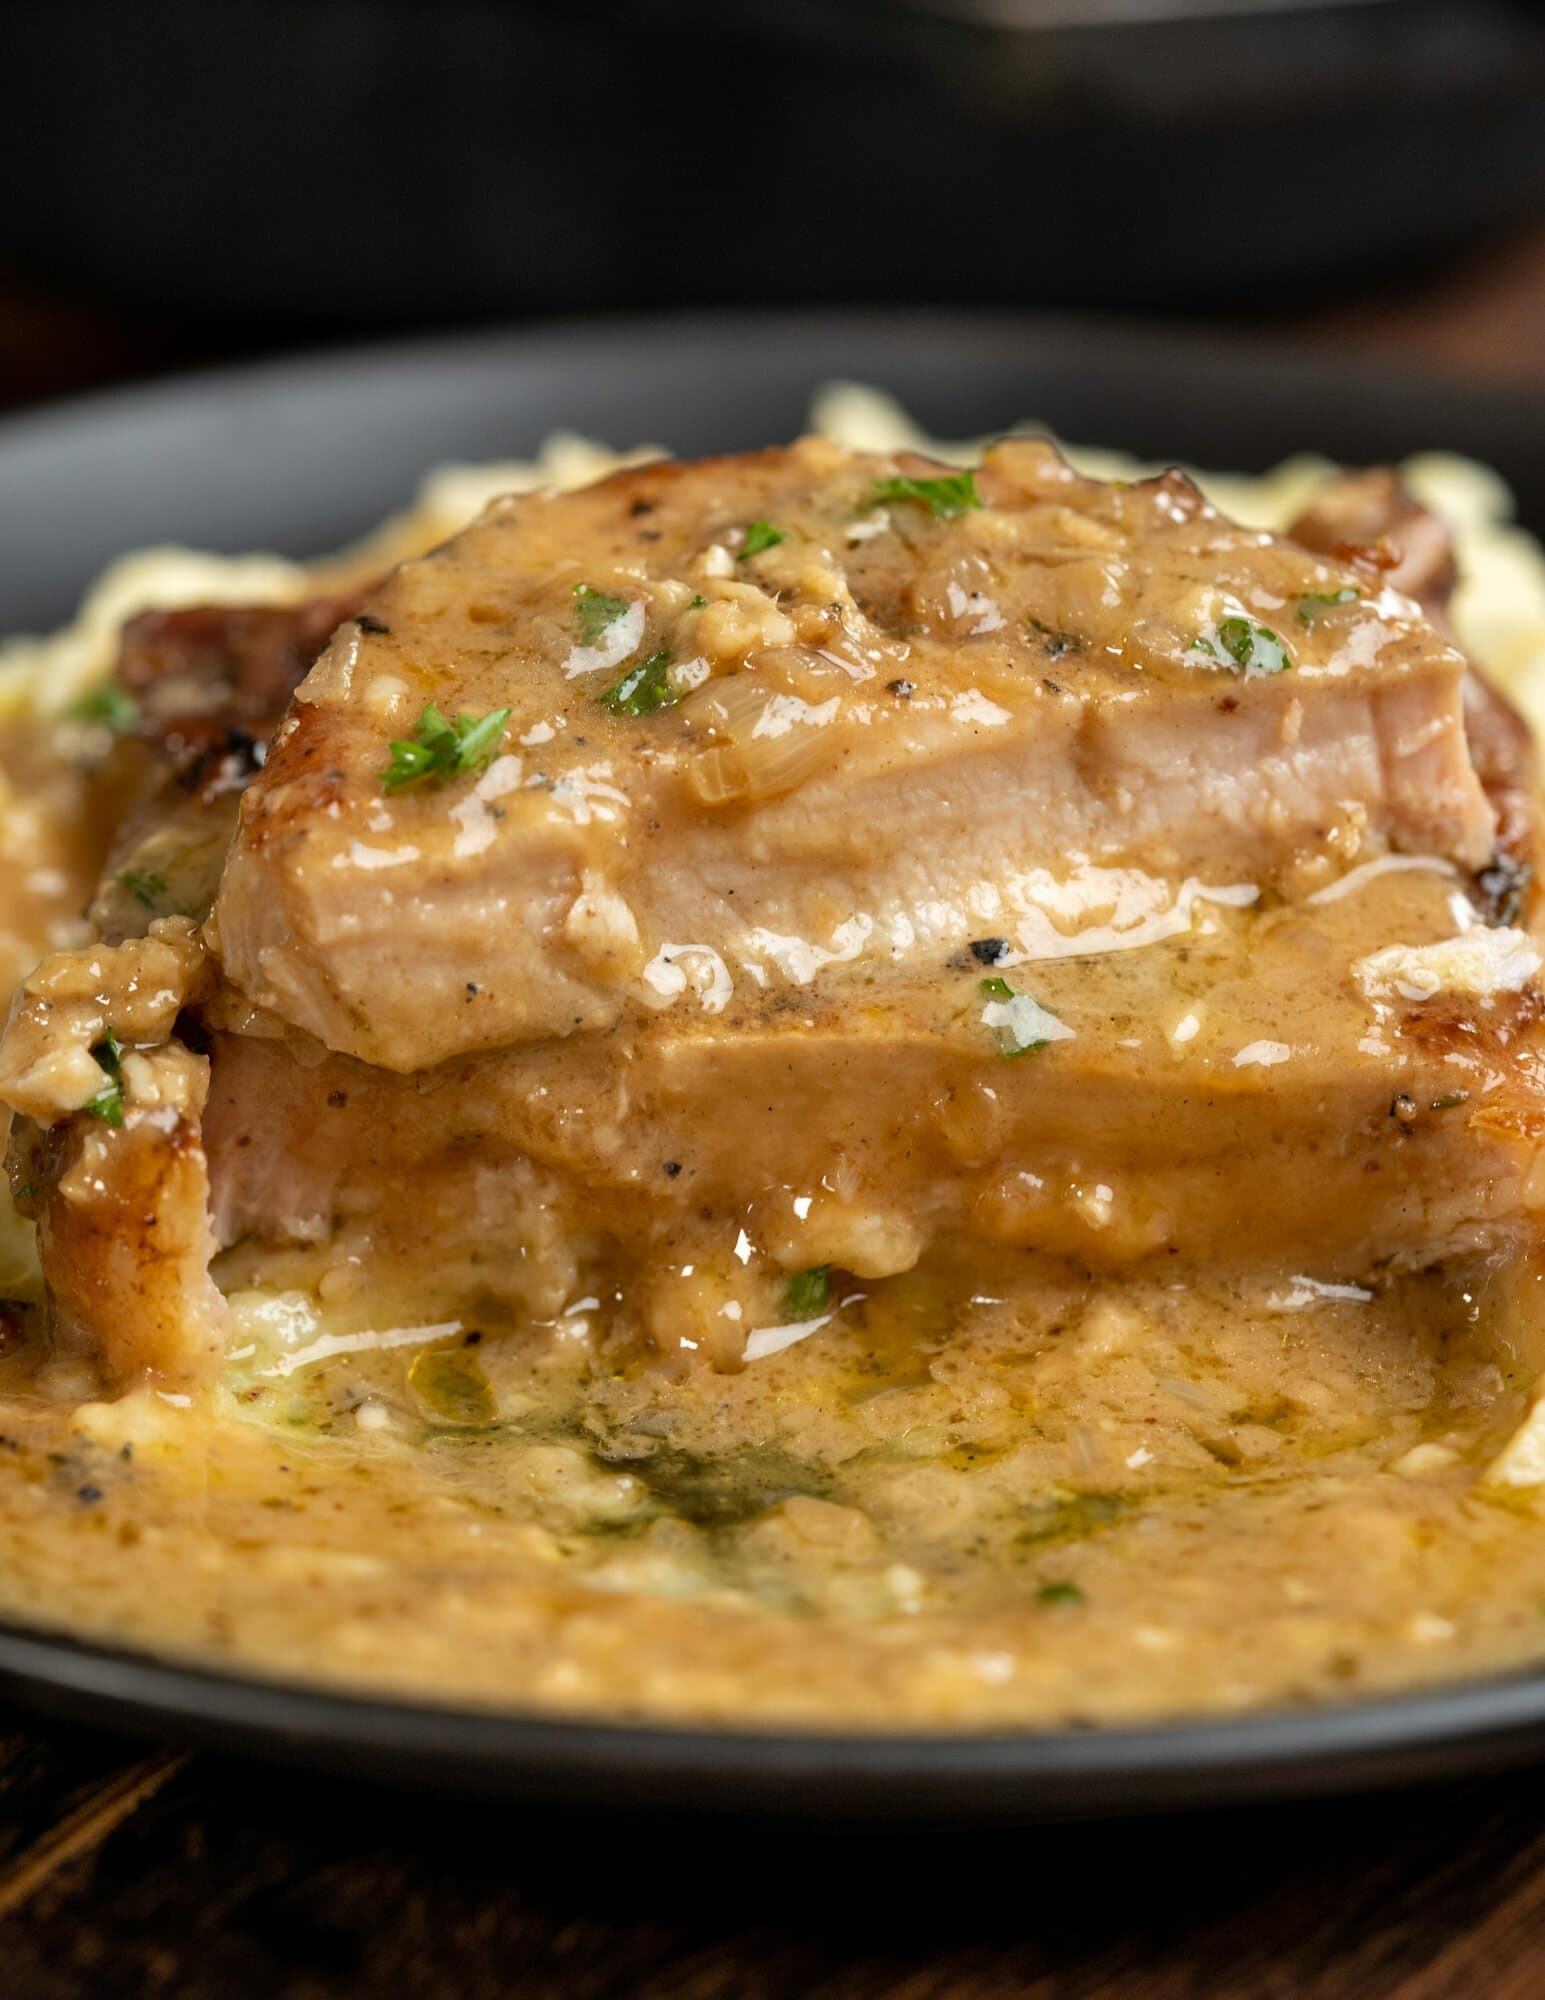 Light pink inside of cut pork chops, seared in a skillet and cooked with a sour cream gravy